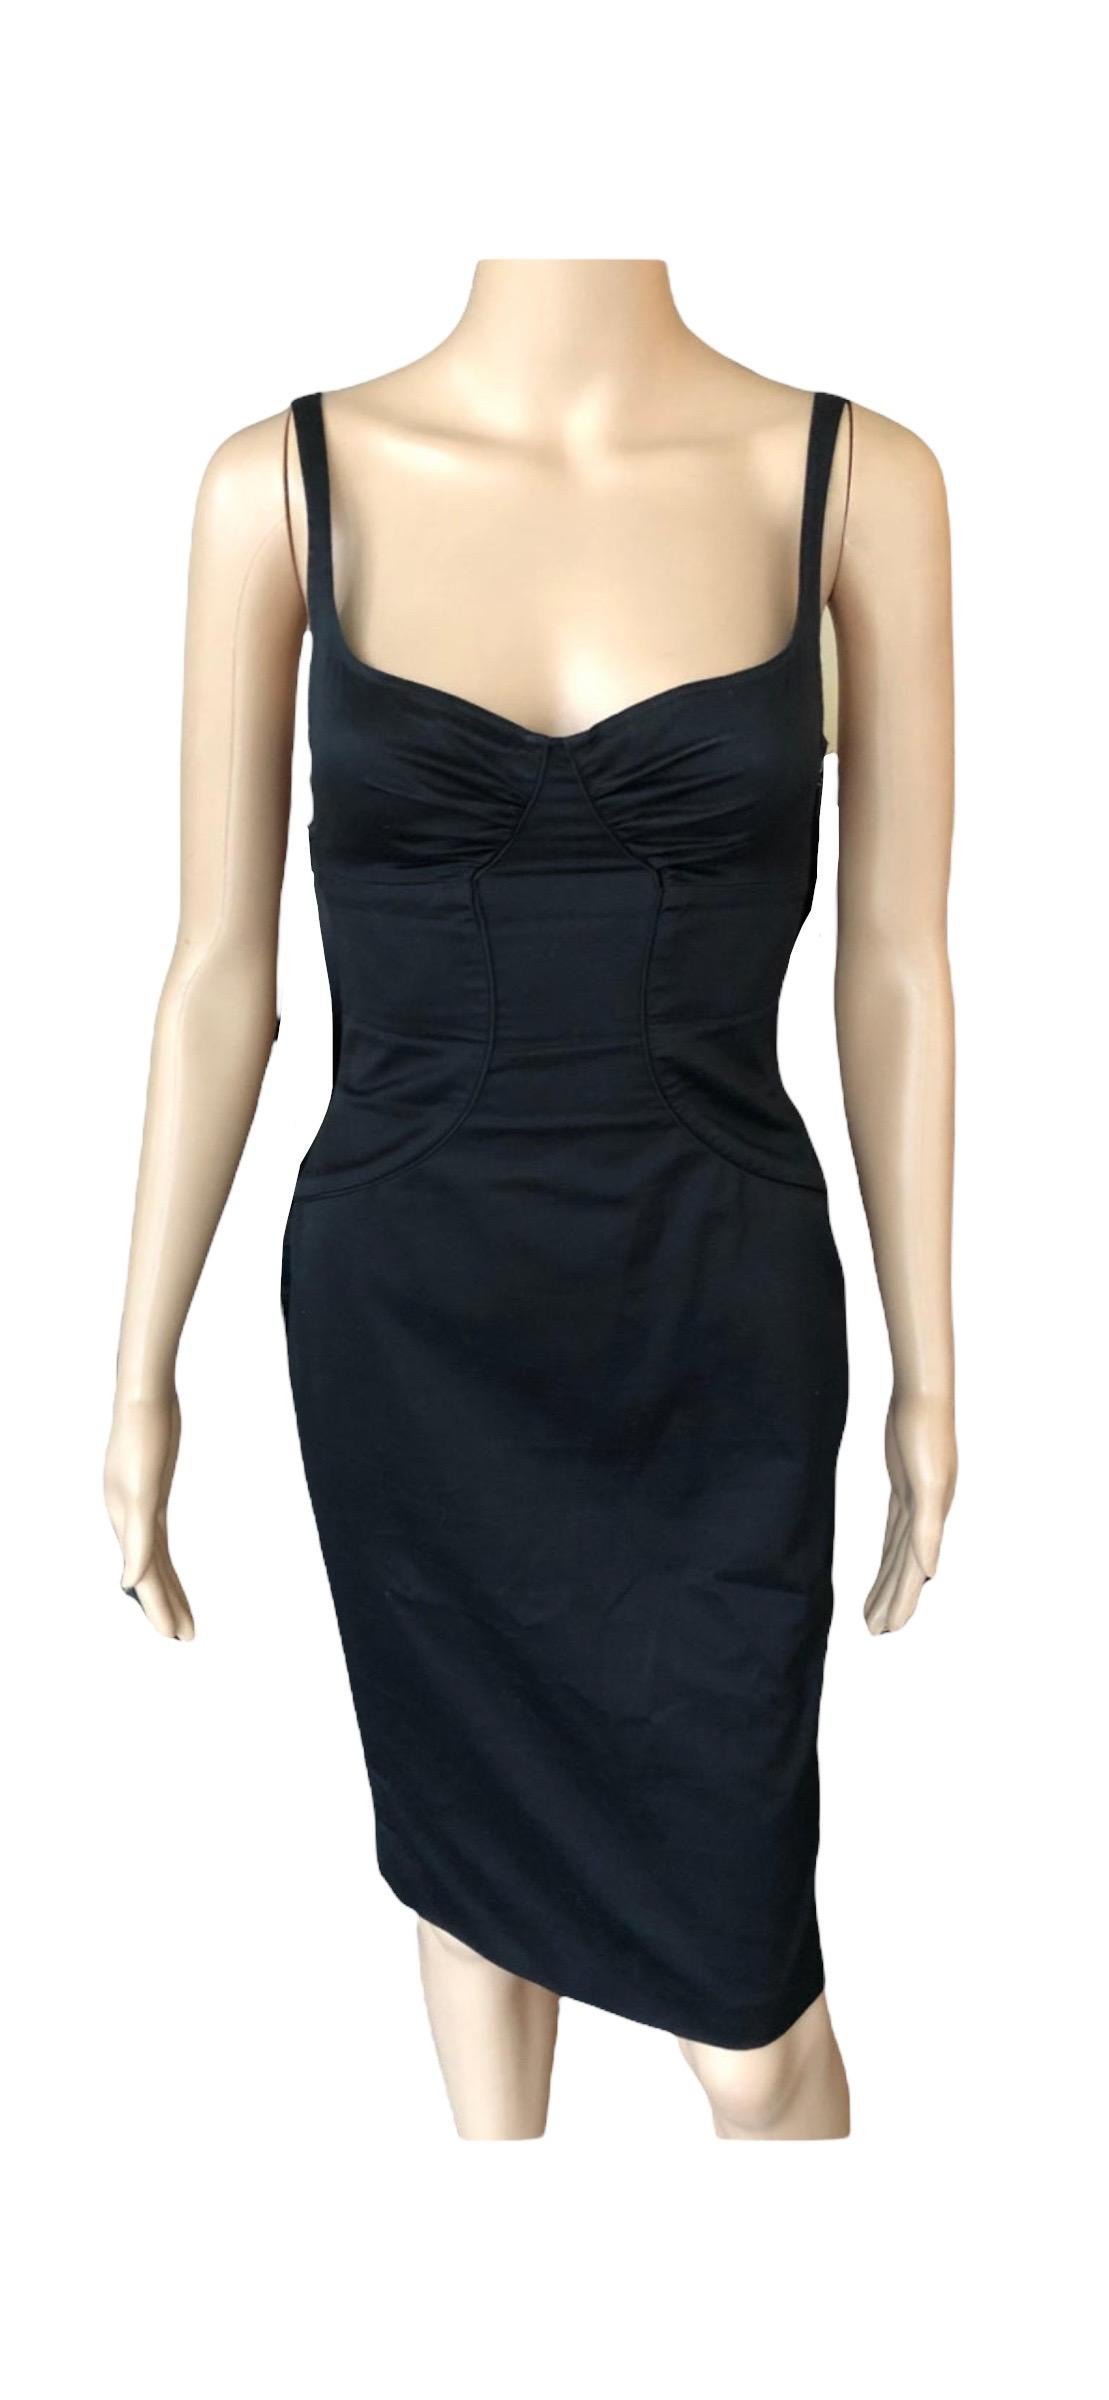 Tom Ford for Gucci 2003 Bustier Cutout Back Black Mini Dress For Sale 1